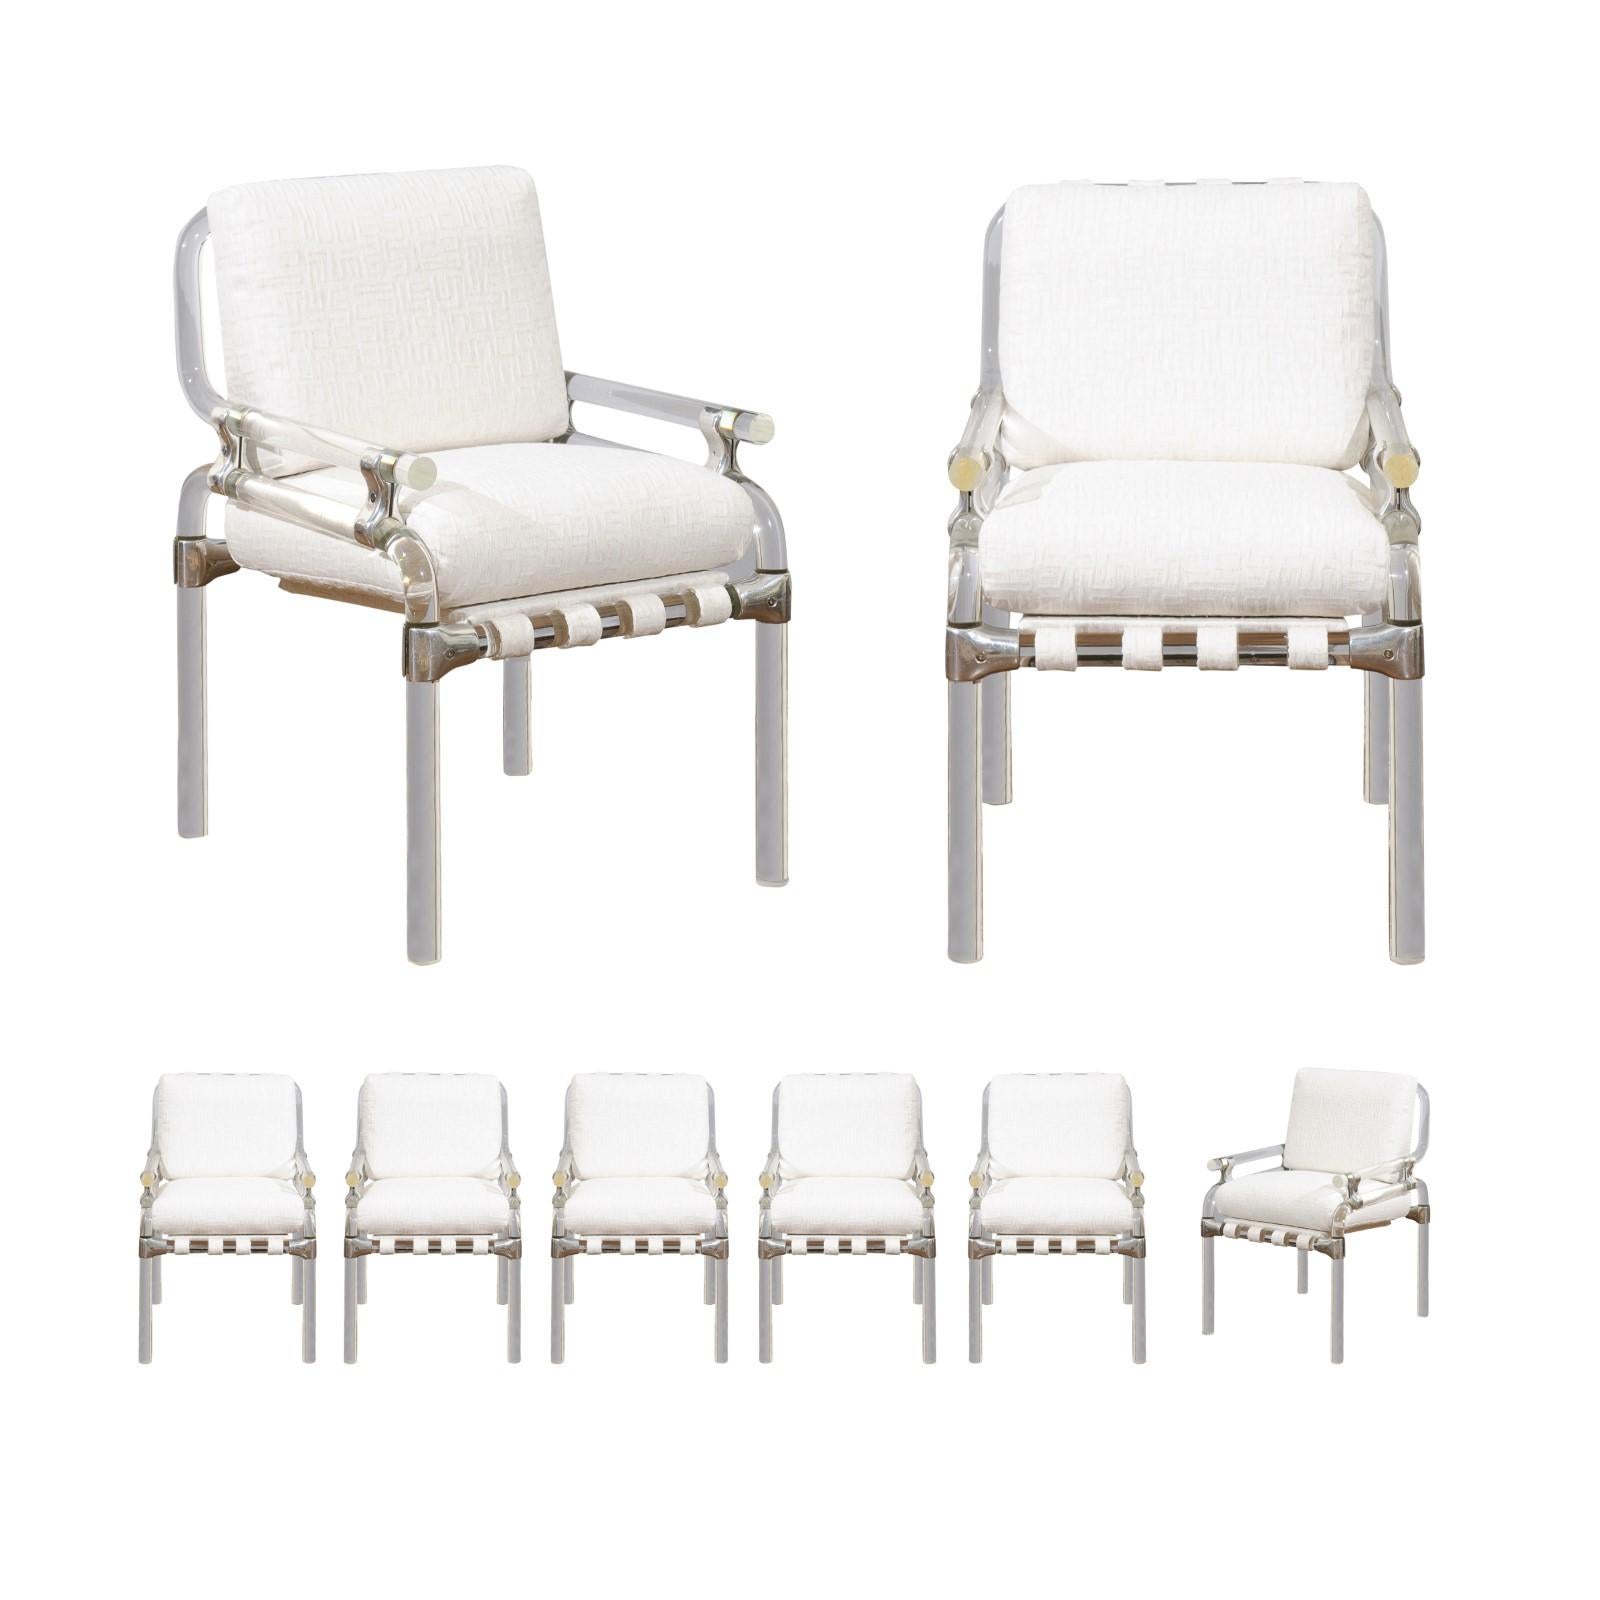 Staggering Set of 8 Lucite Arm Dining Chairs by Jeff Messerschmidt, 1985 For Sale